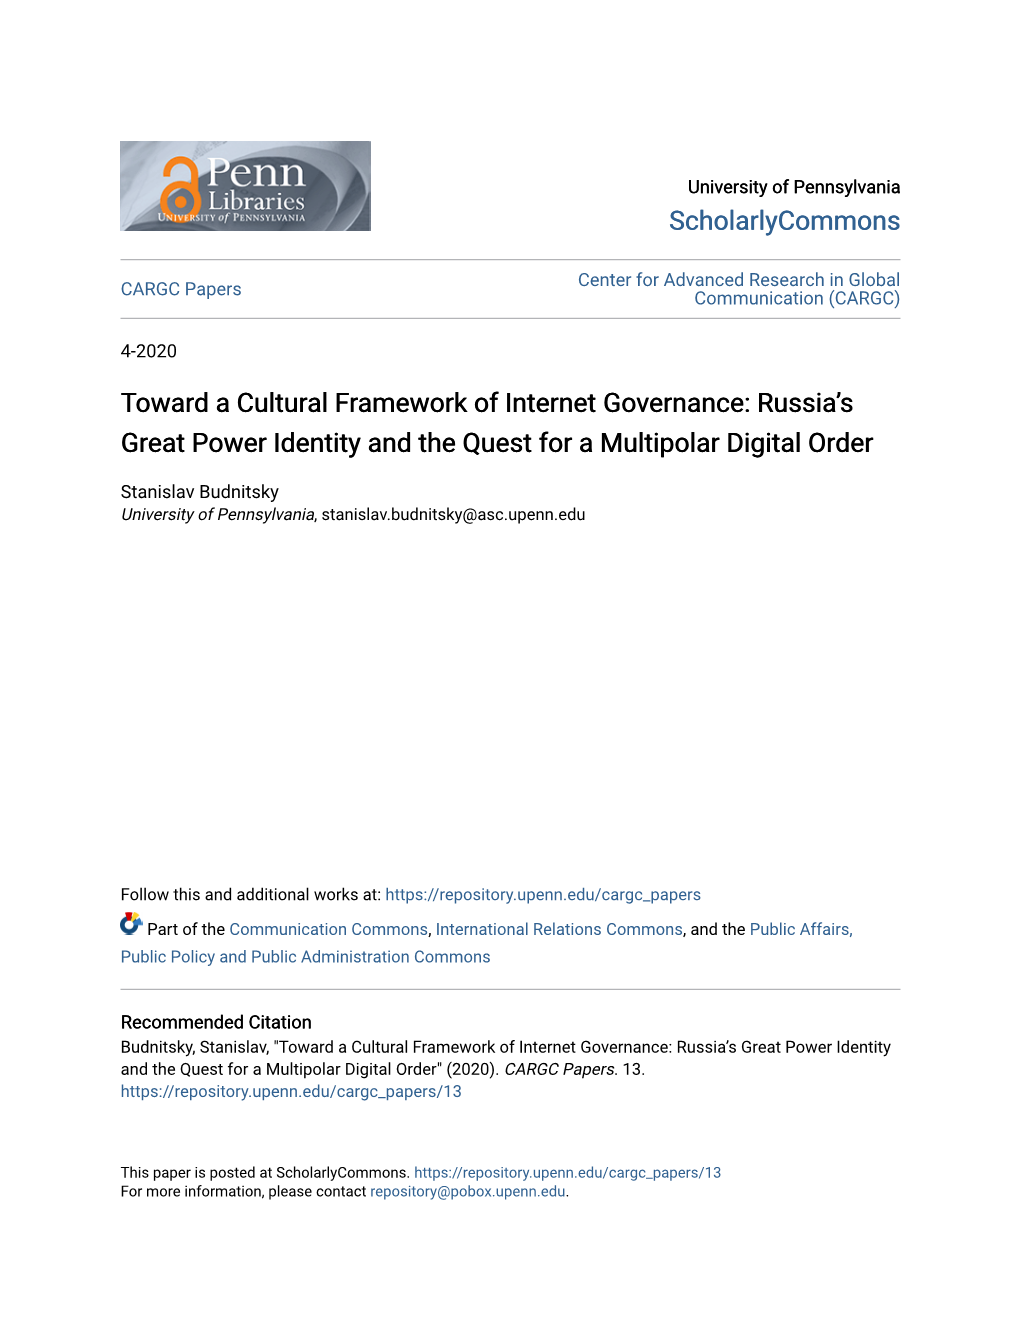 Toward a Cultural Framework of Internet Governance: Russia’S Great Power Identity and the Quest for a Multipolar Digital Order